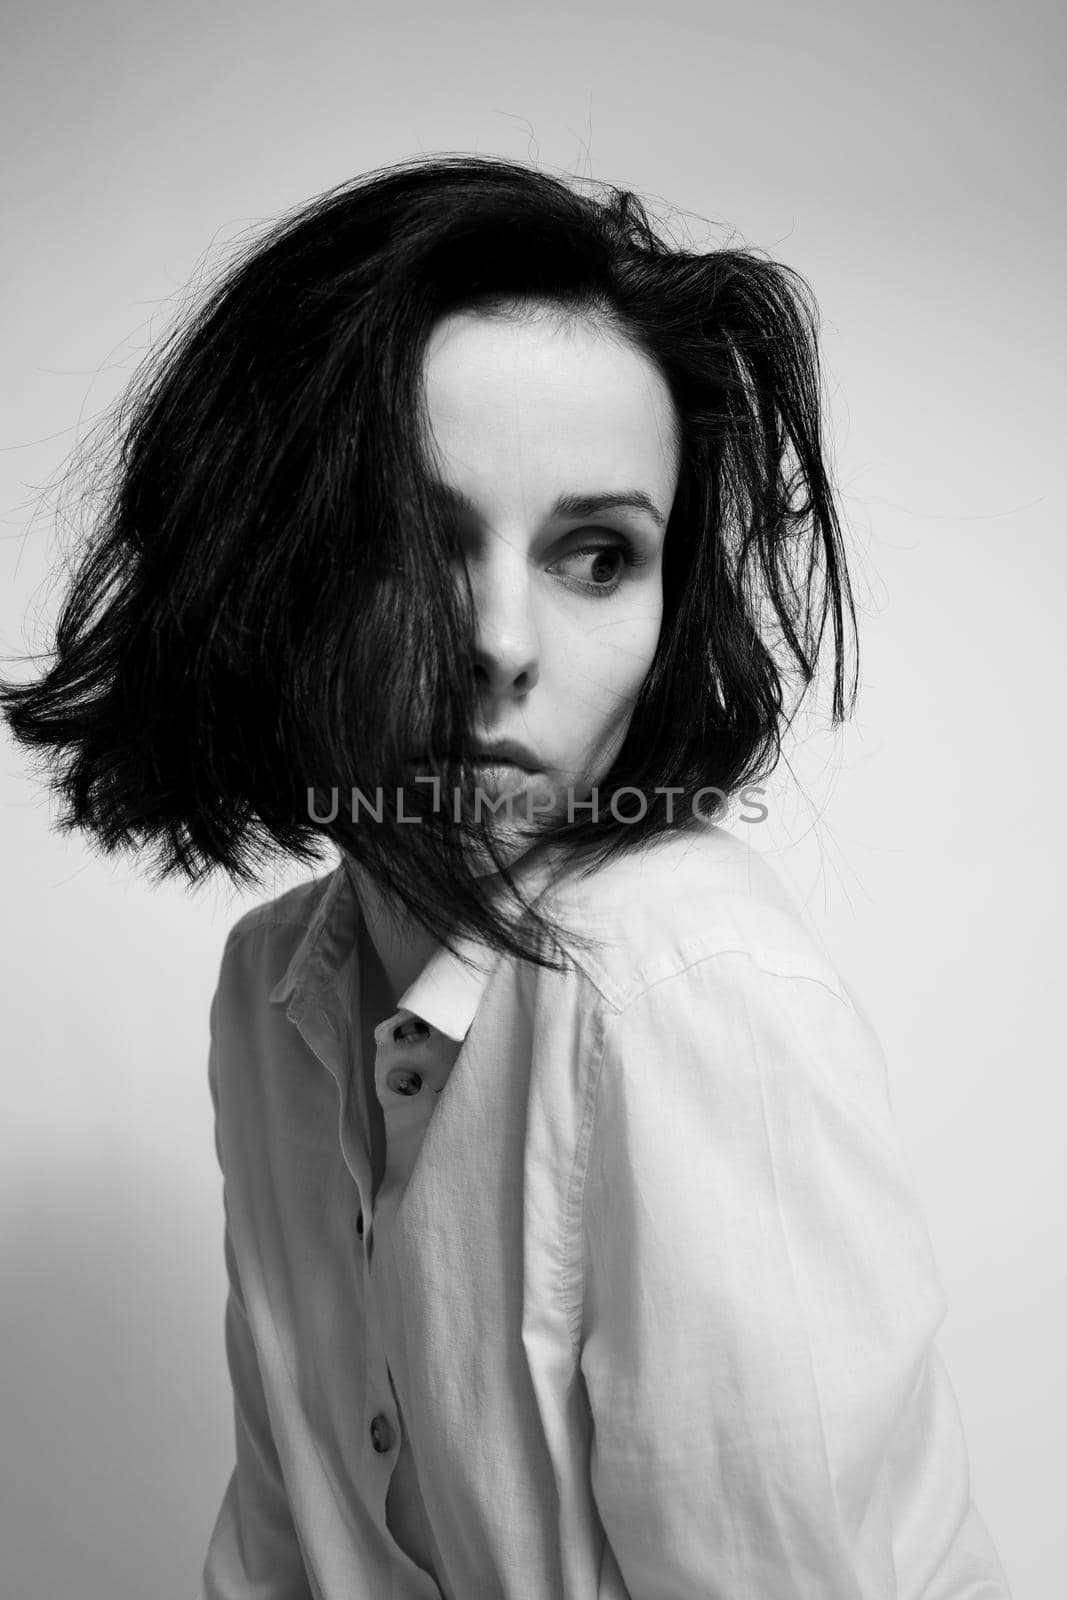 woman in a shirt, light background black and white photography by shilovskaya